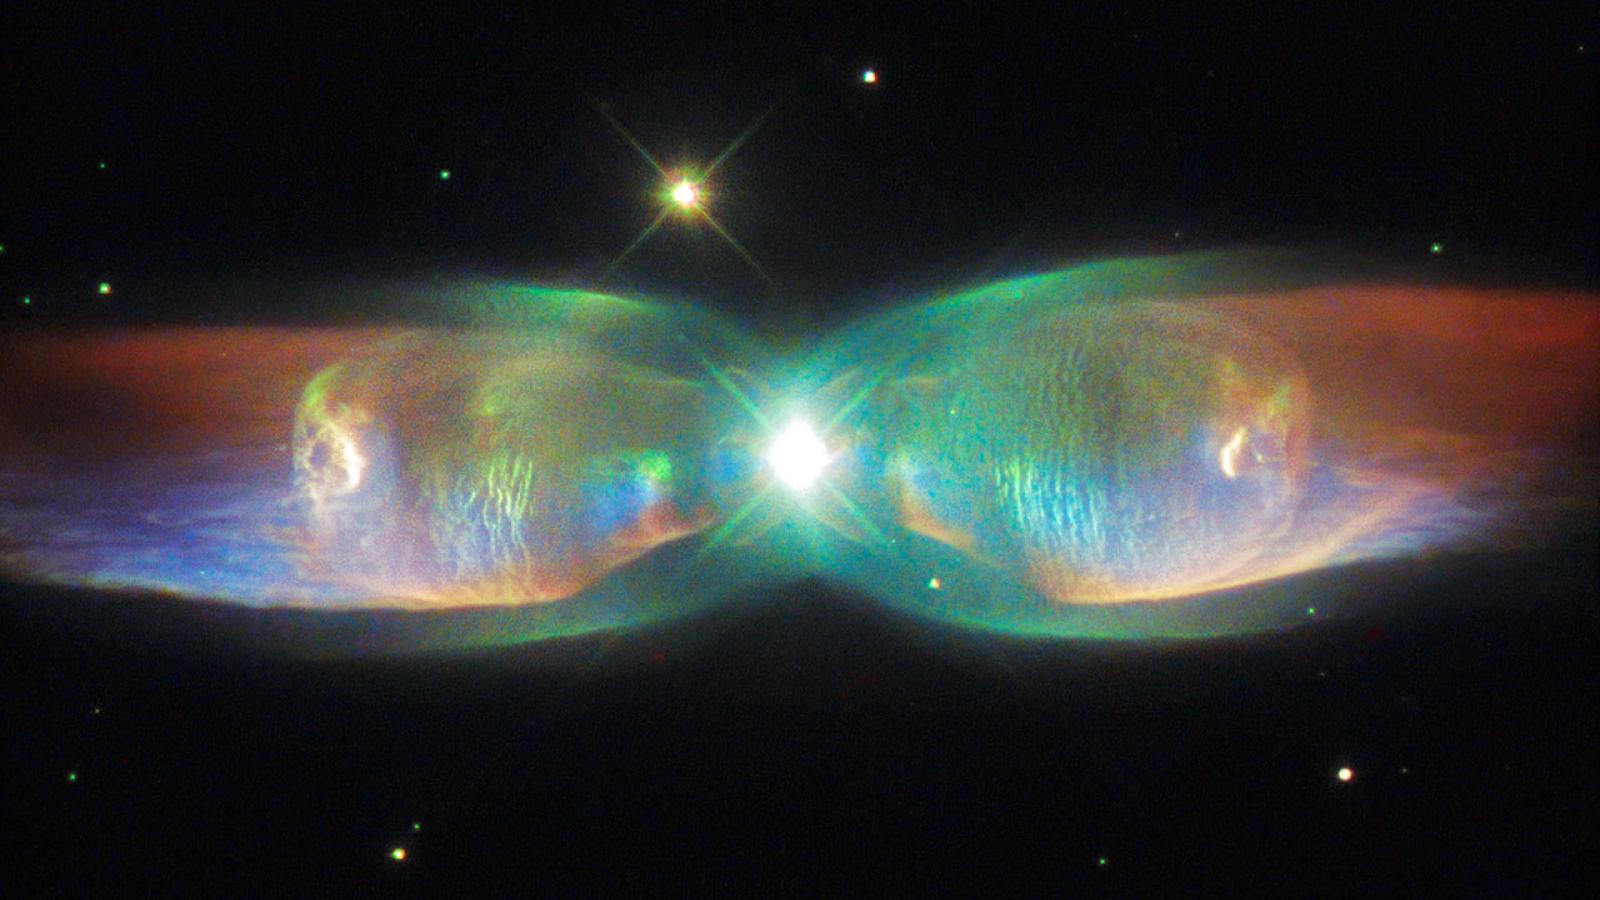 Photo of the butterfly nebula from Hubble